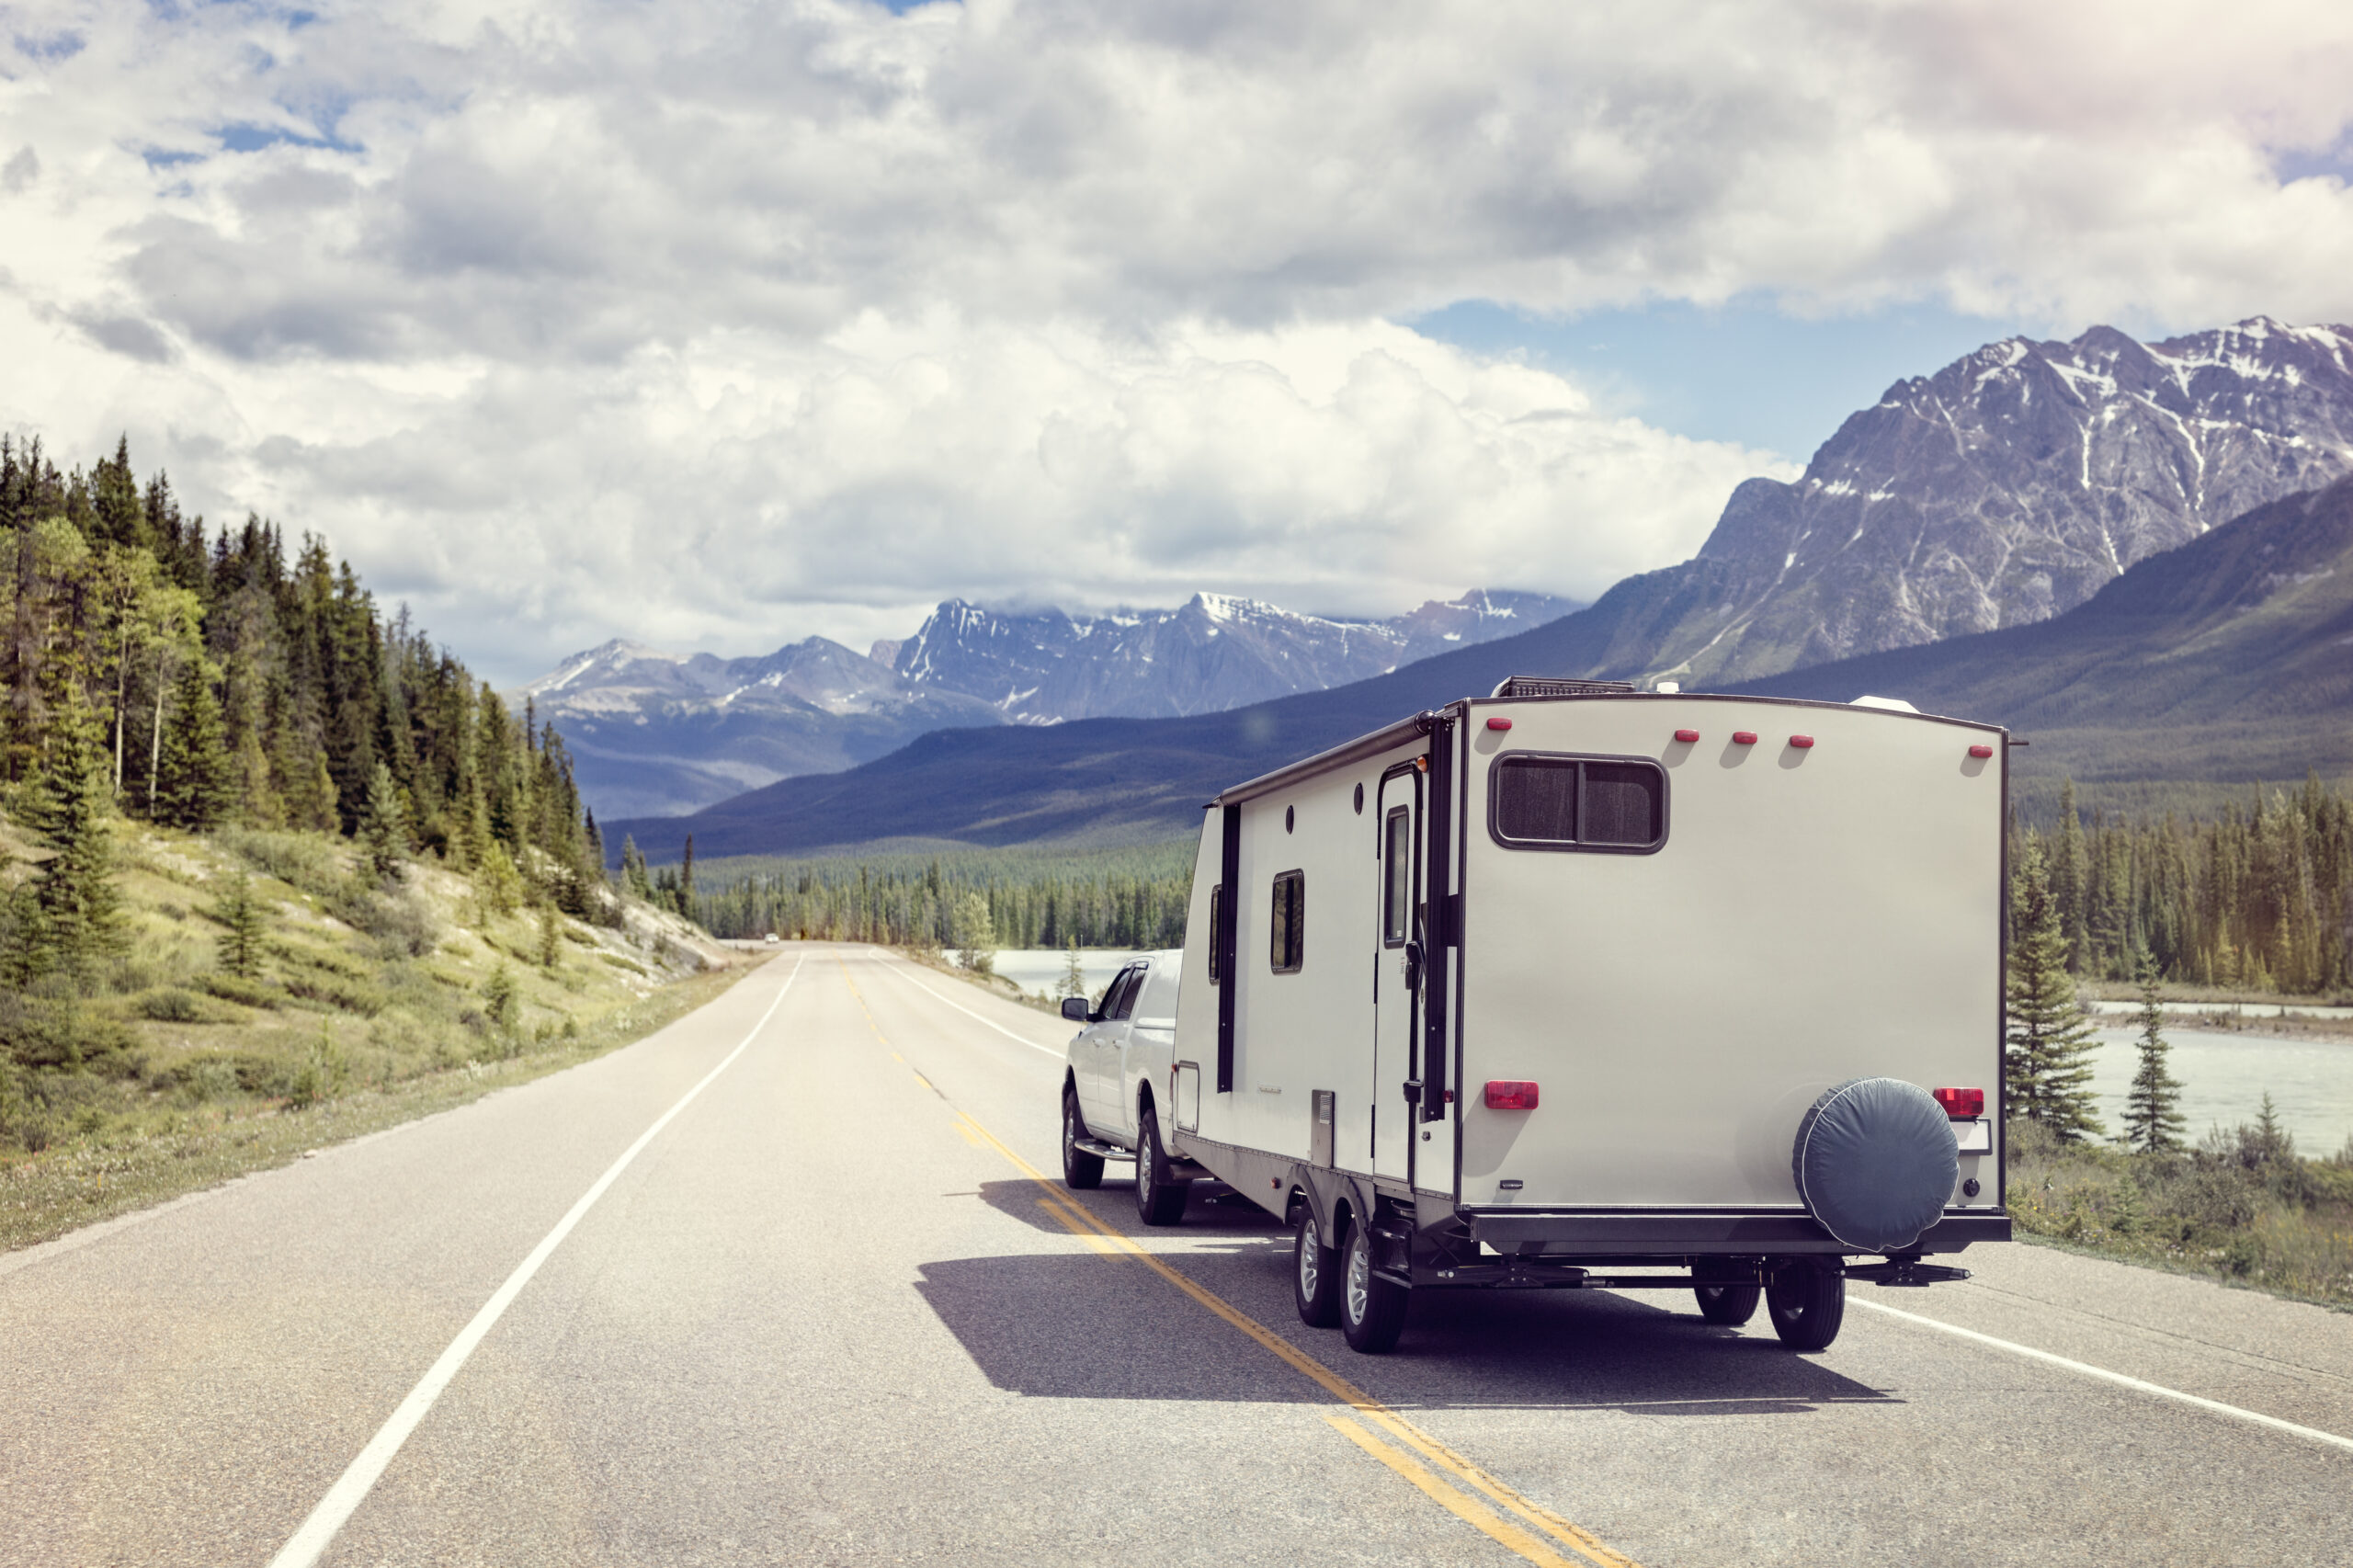 A pickup truck towing an RV through scenic landscape.